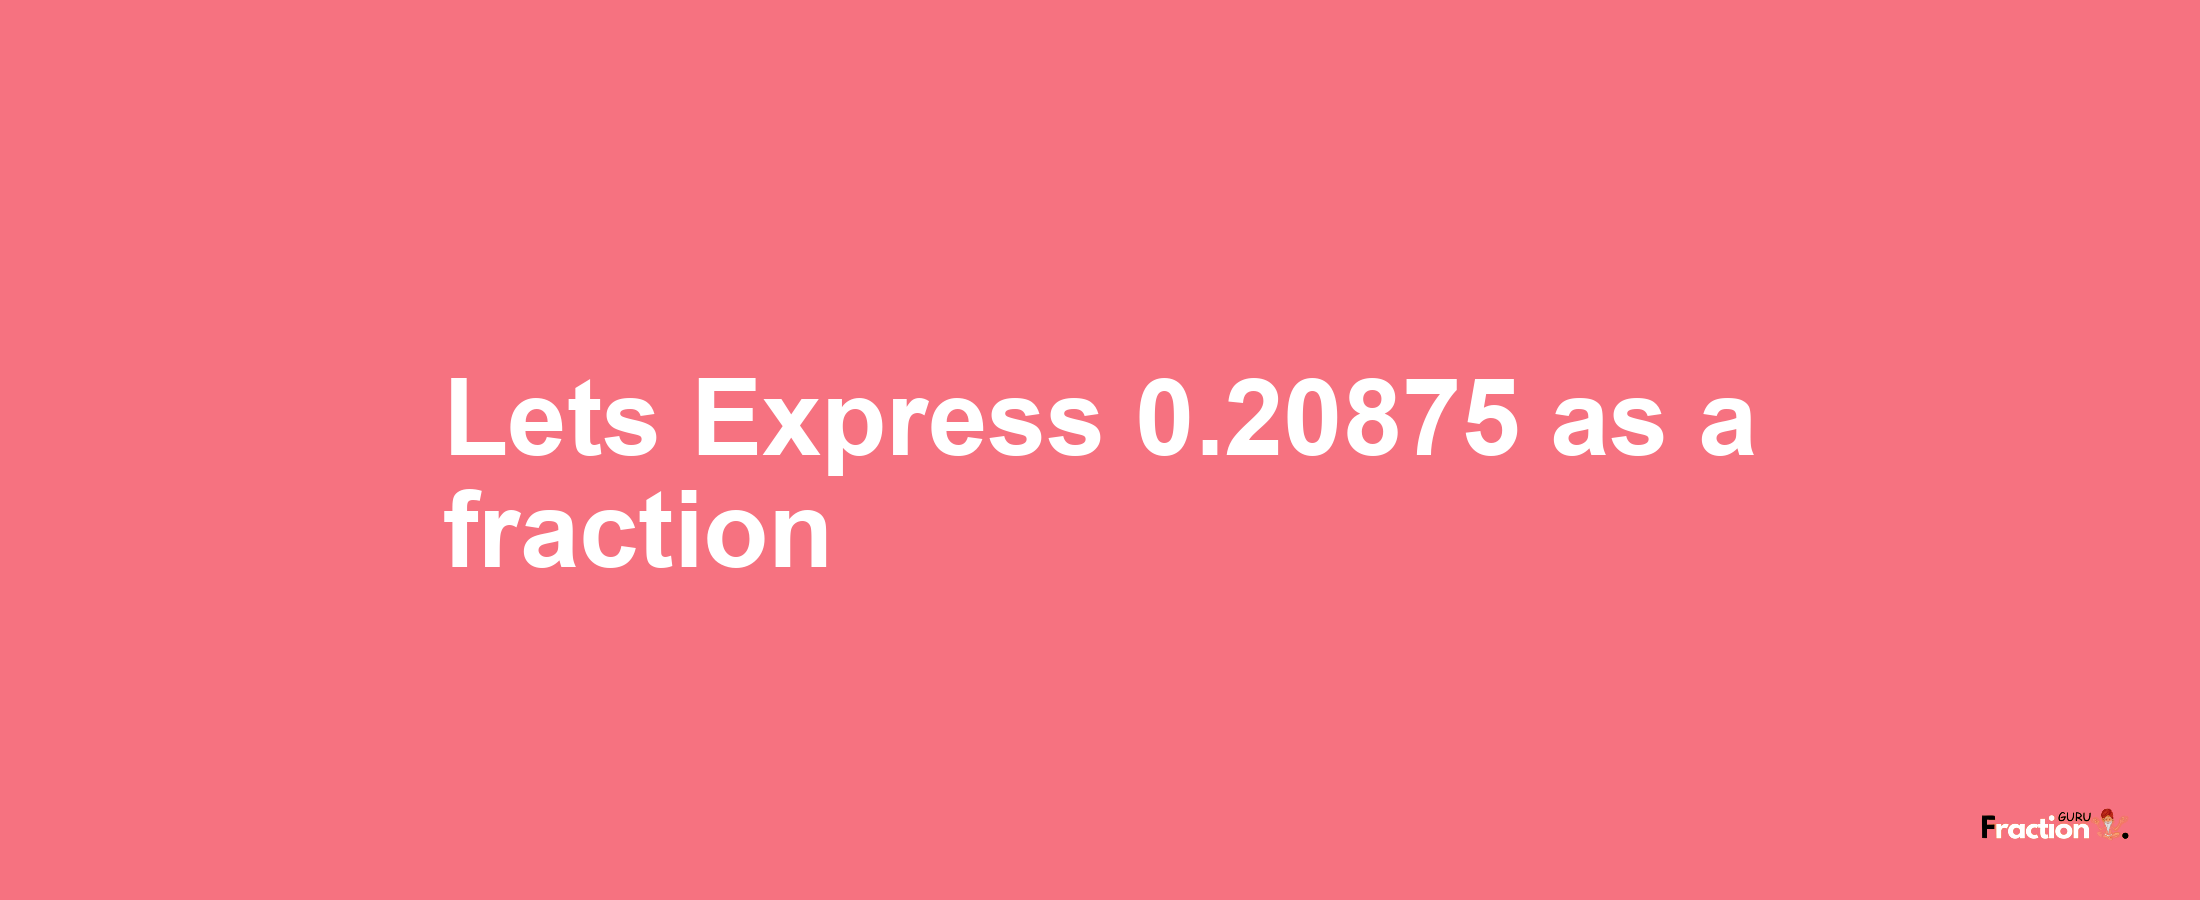 Lets Express 0.20875 as afraction